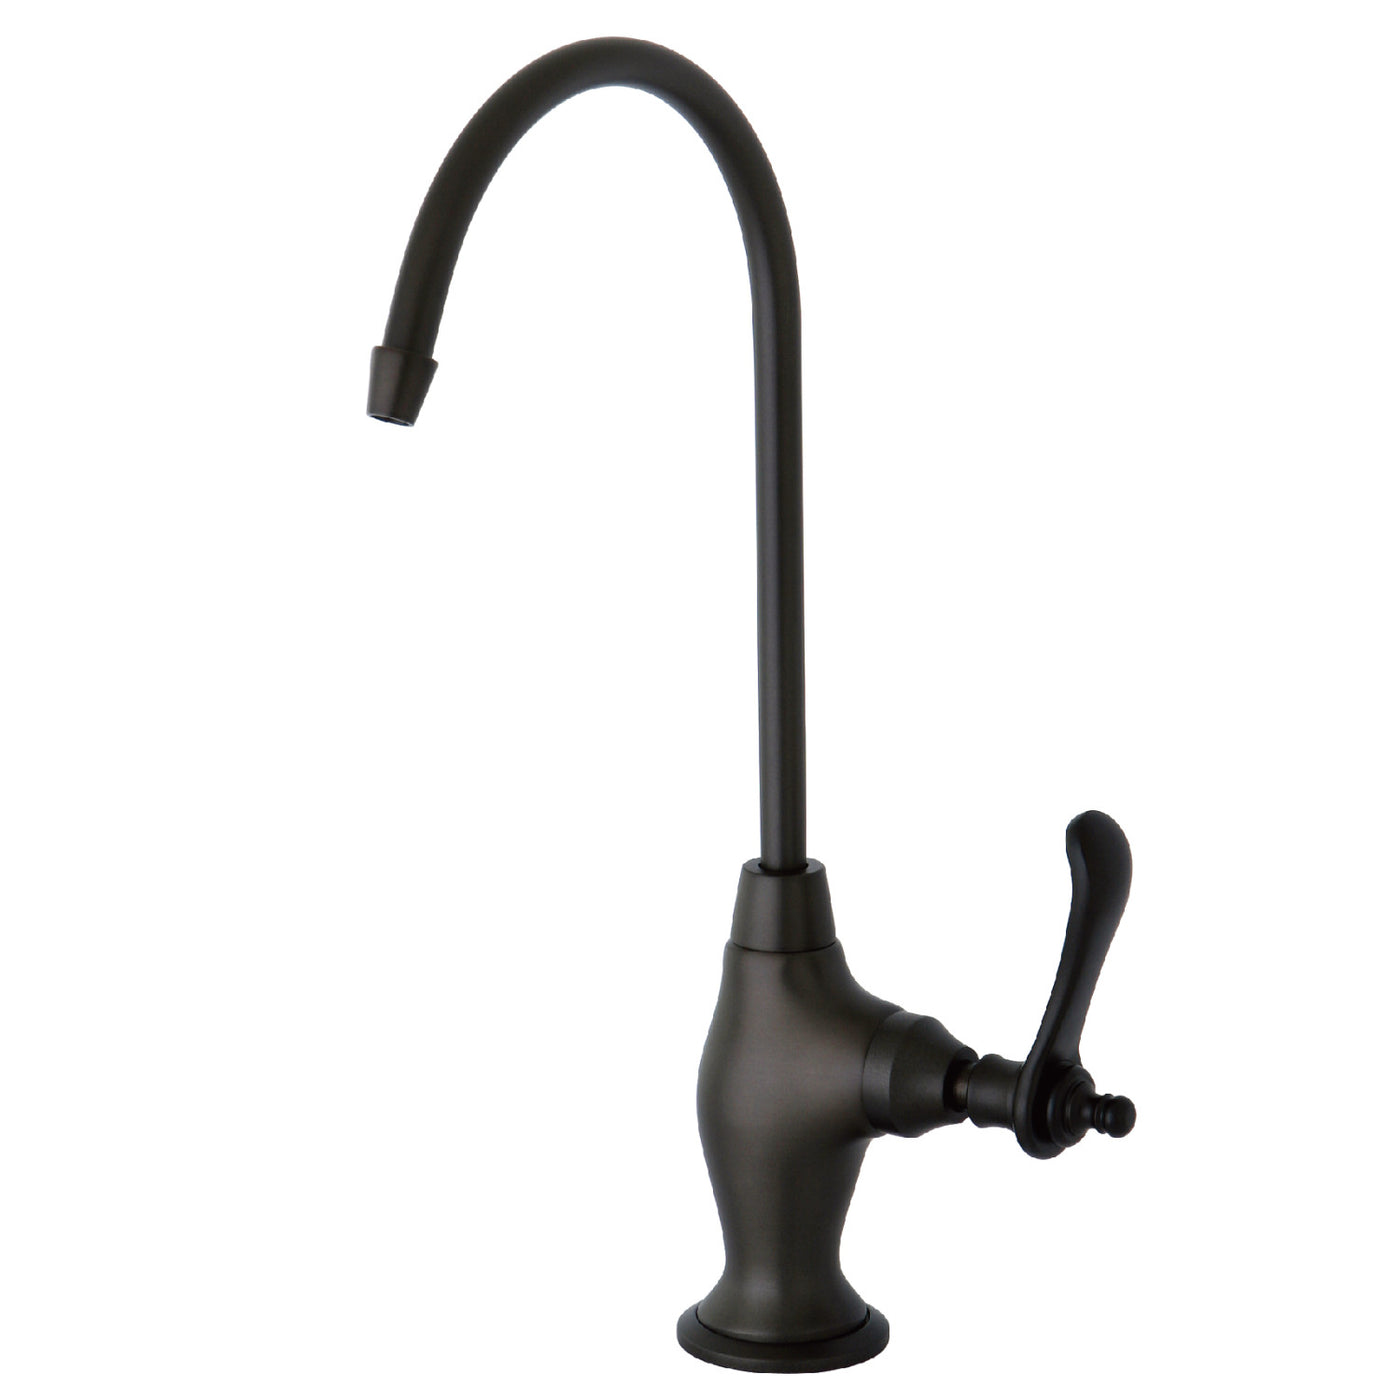 Elements of Design ES3195TL 1/4 Turn Water Filtration Faucet, Oil Rubbed Bronze